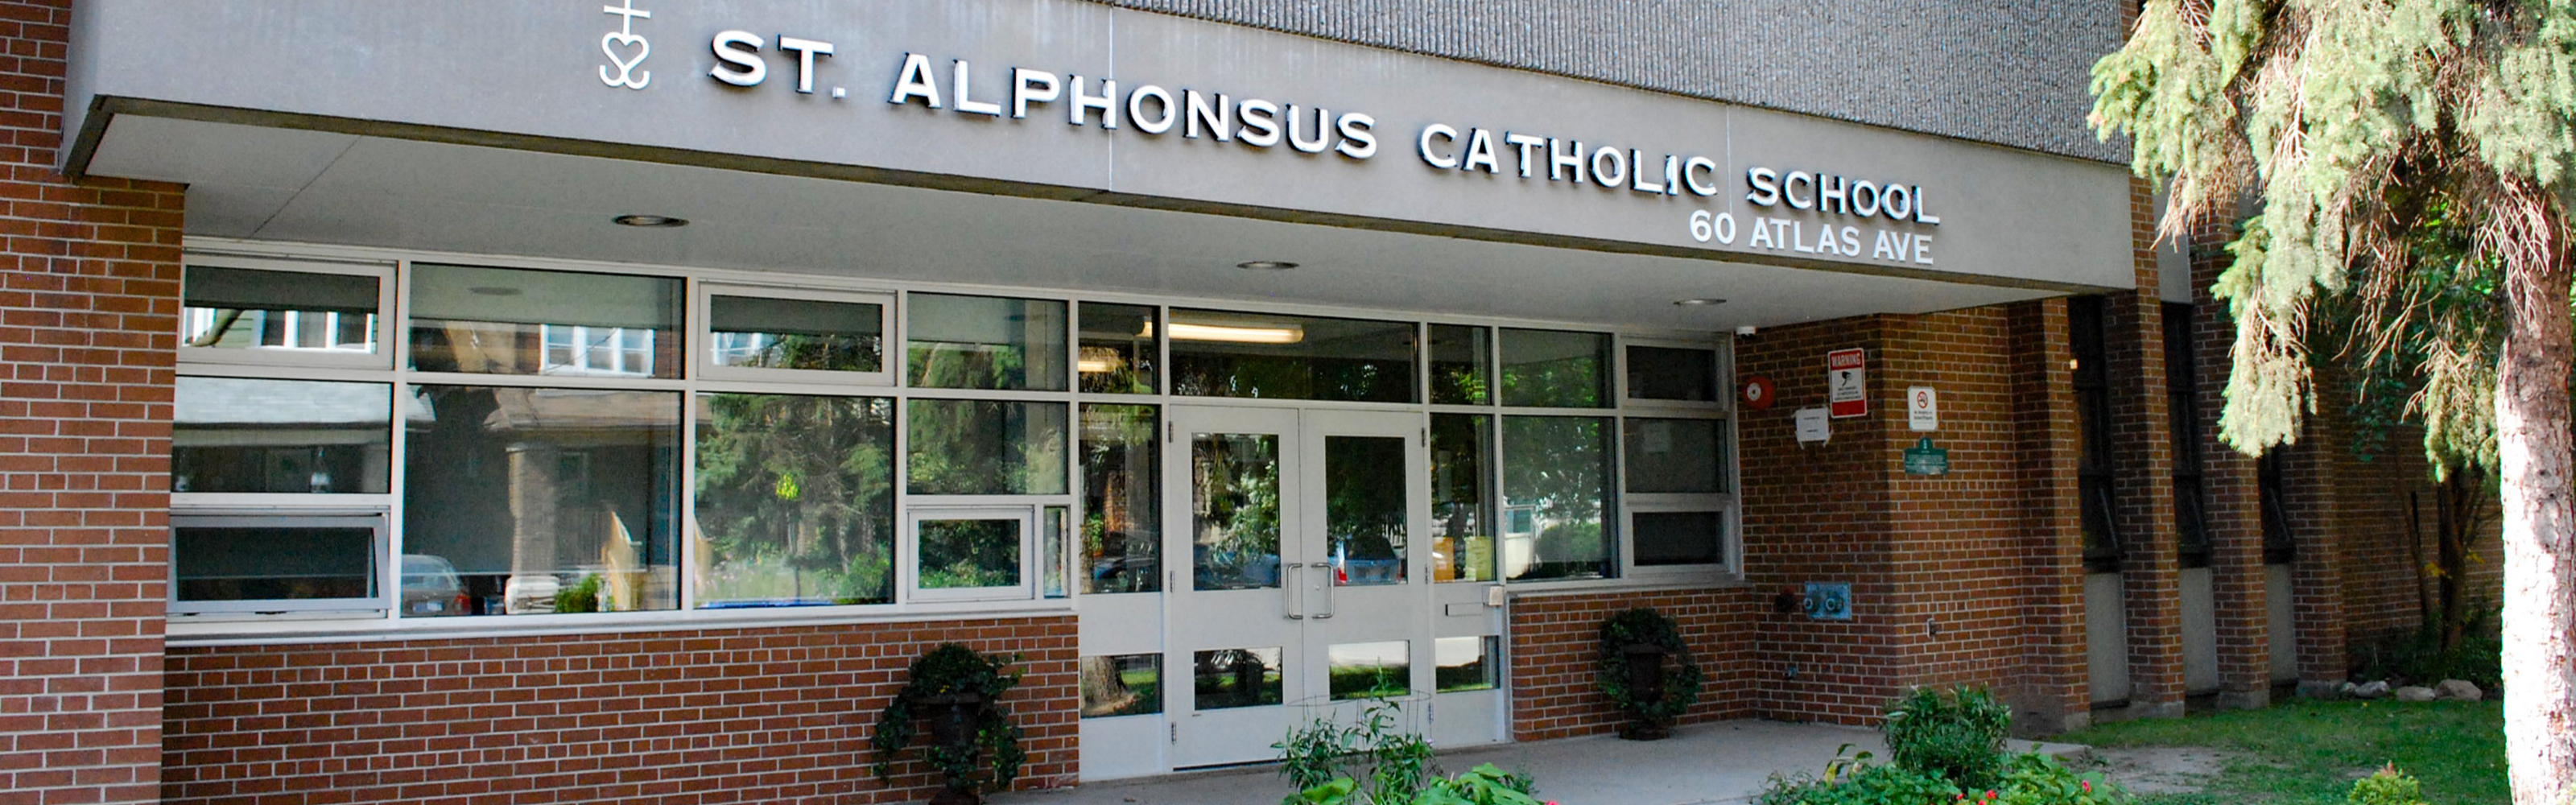 The front of the St. Alphonsus Catholic School building.